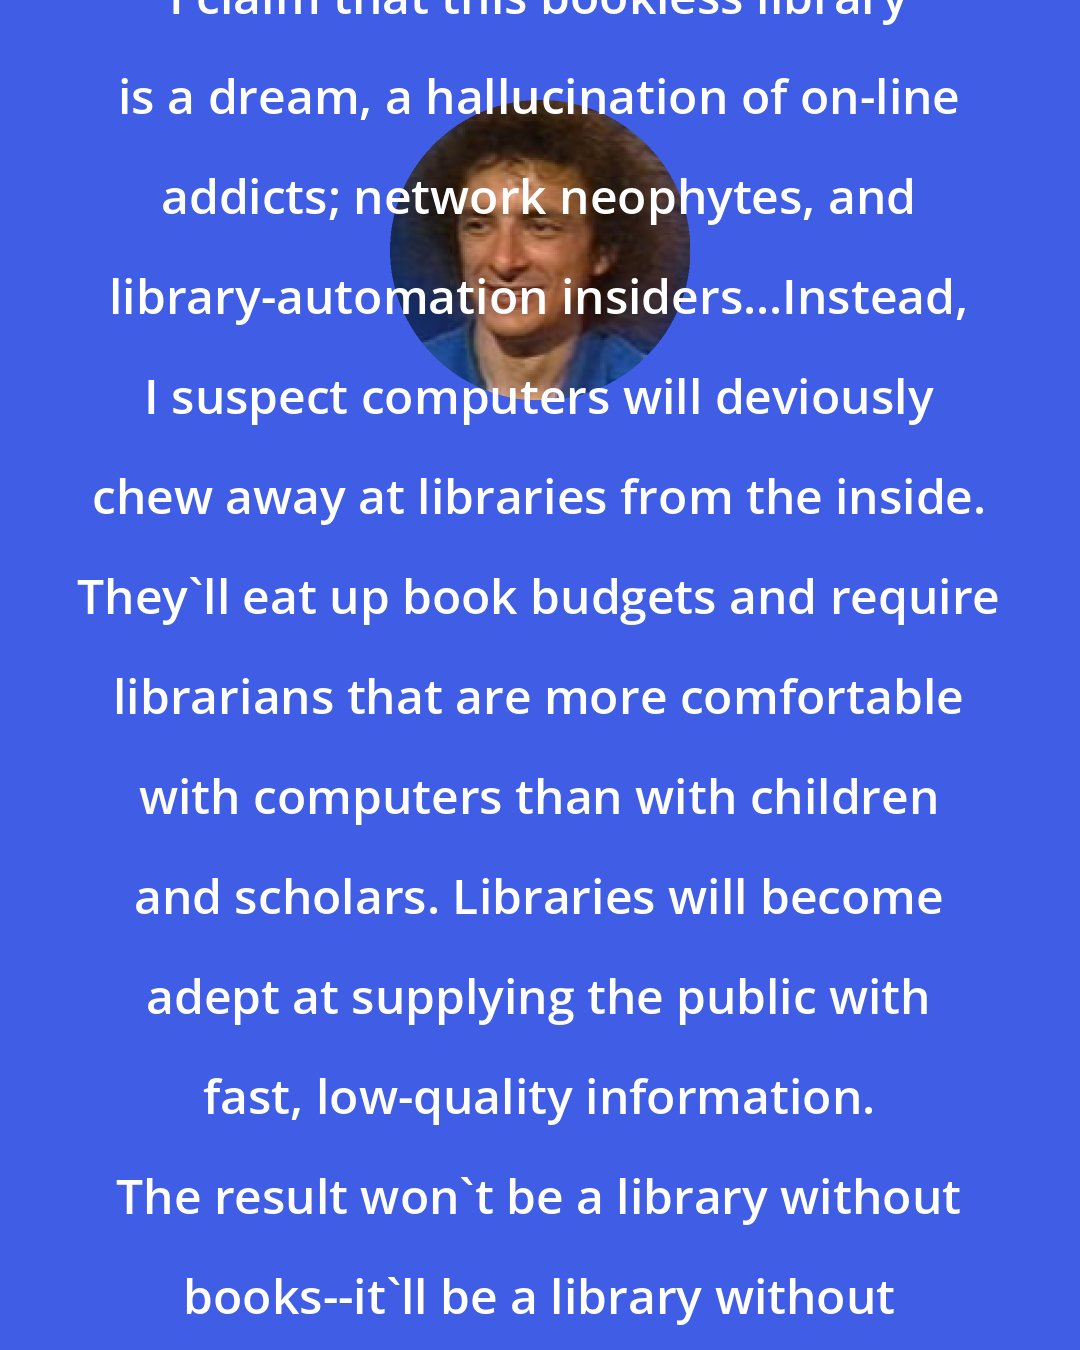 Clifford Stoll: I claim that this bookless library is a dream, a hallucination of on-line addicts; network neophytes, and library-automation insiders...Instead, I suspect computers will deviously chew away at libraries from the inside. They'll eat up book budgets and require librarians that are more comfortable with computers than with children and scholars. Libraries will become adept at supplying the public with fast, low-quality information. The result won't be a library without books--it'll be a library without value.